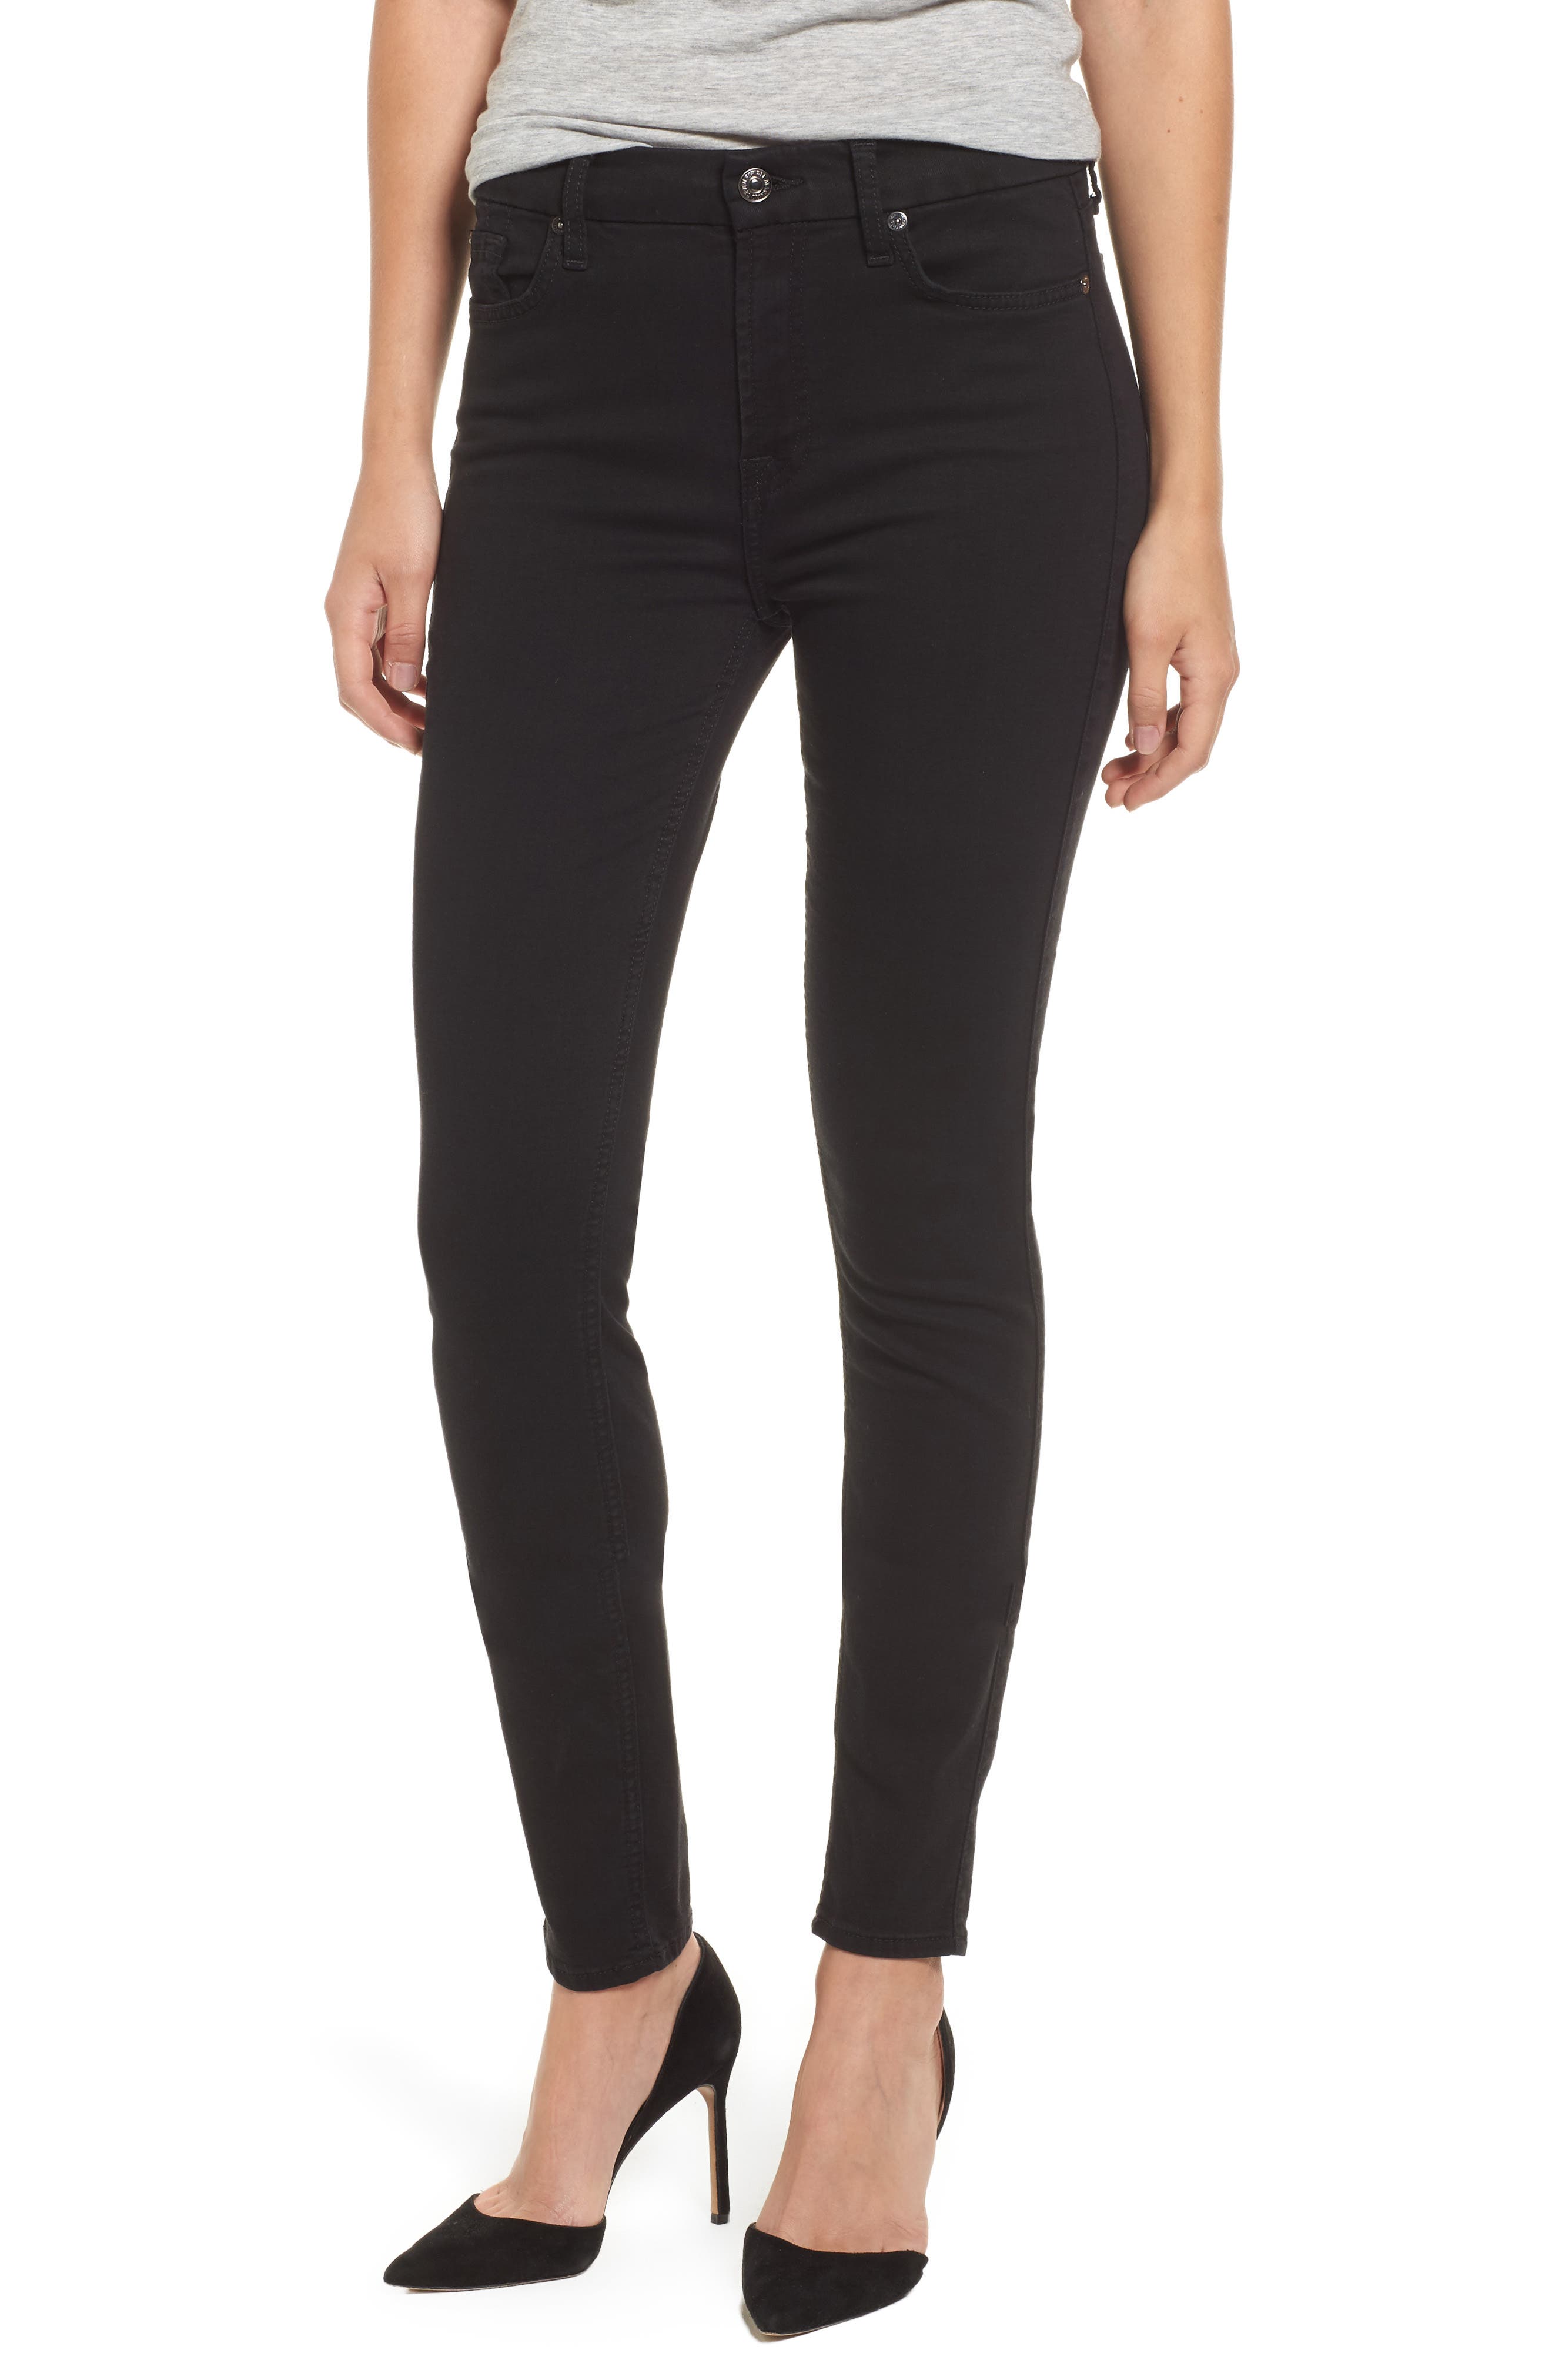 seven for all mankind black jeans